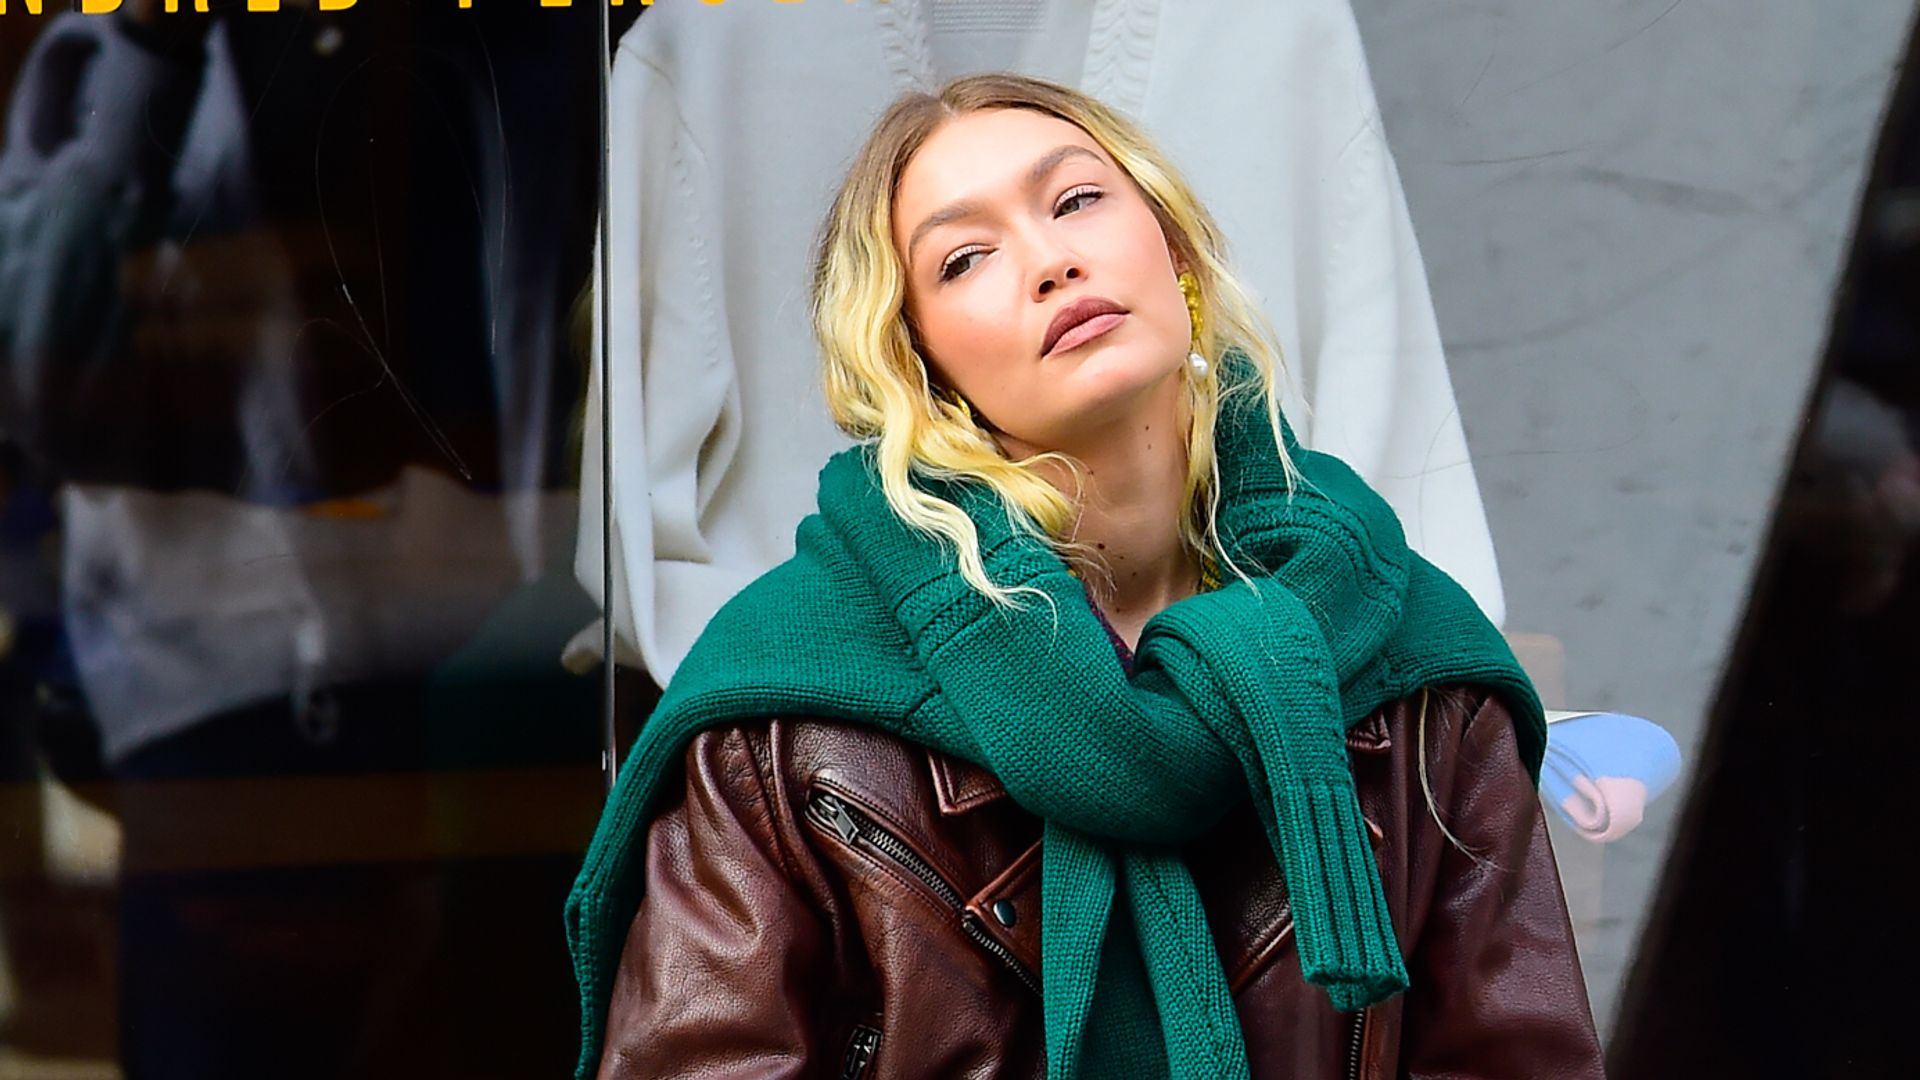  Gigi Hadid is seen at photoshoot in NYC wearing a green knit, brown leather jacket, whiote trousers and sneakers